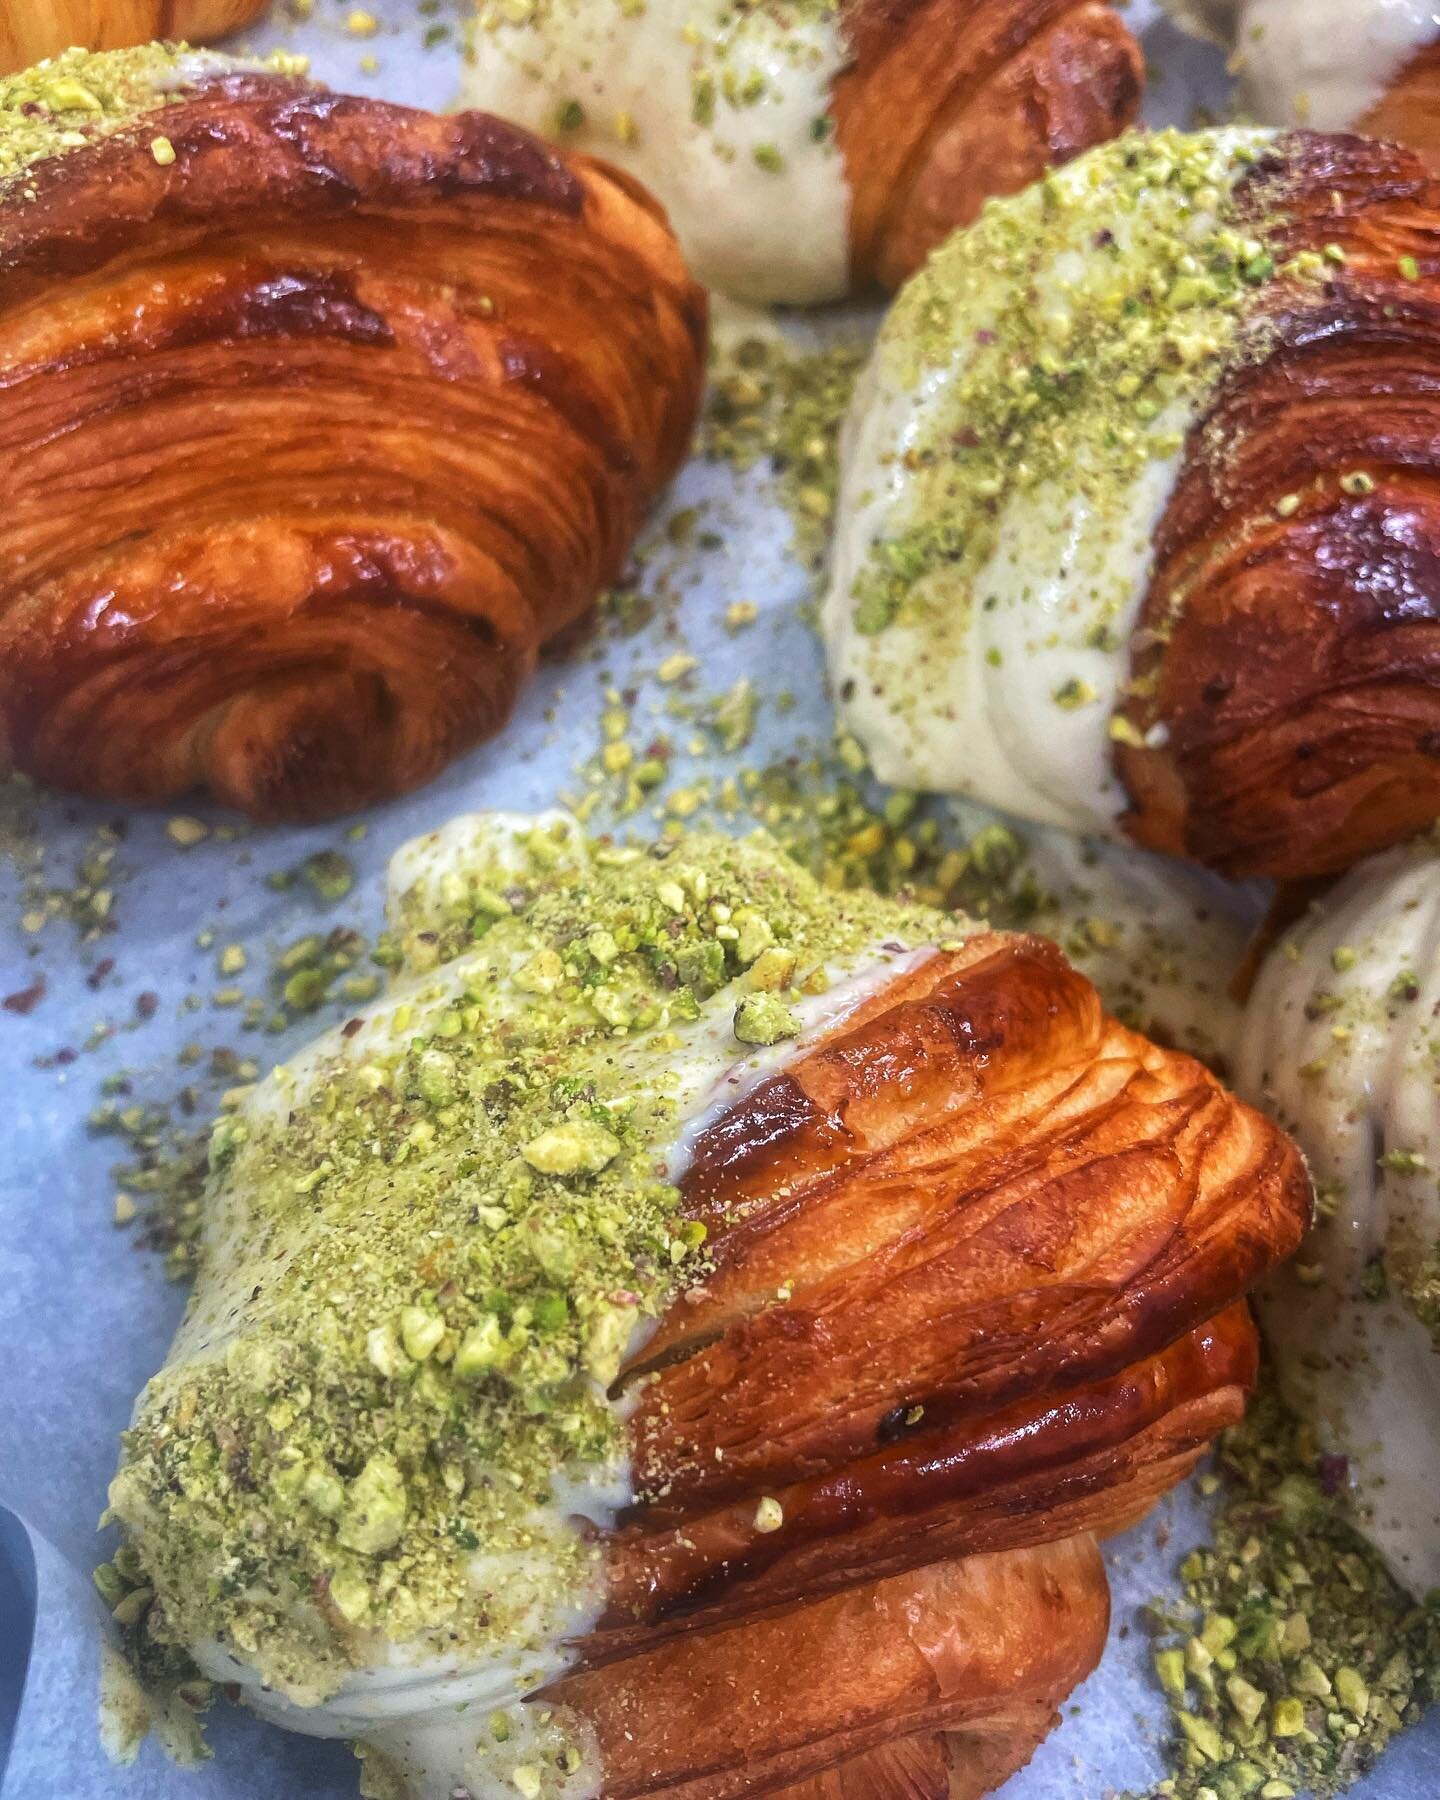 Pistachio croissants
Danishes
Almond croissants
Pain au chocolates
Croissants
Cinnamon
Cardamom
Hazelnut/chocolate
Pastrami and tomatoes
Filled focaccia
Brioches
Blackcurrant and white chocolate..that&rsquo;s only buns..and 24! Types of cakes includi